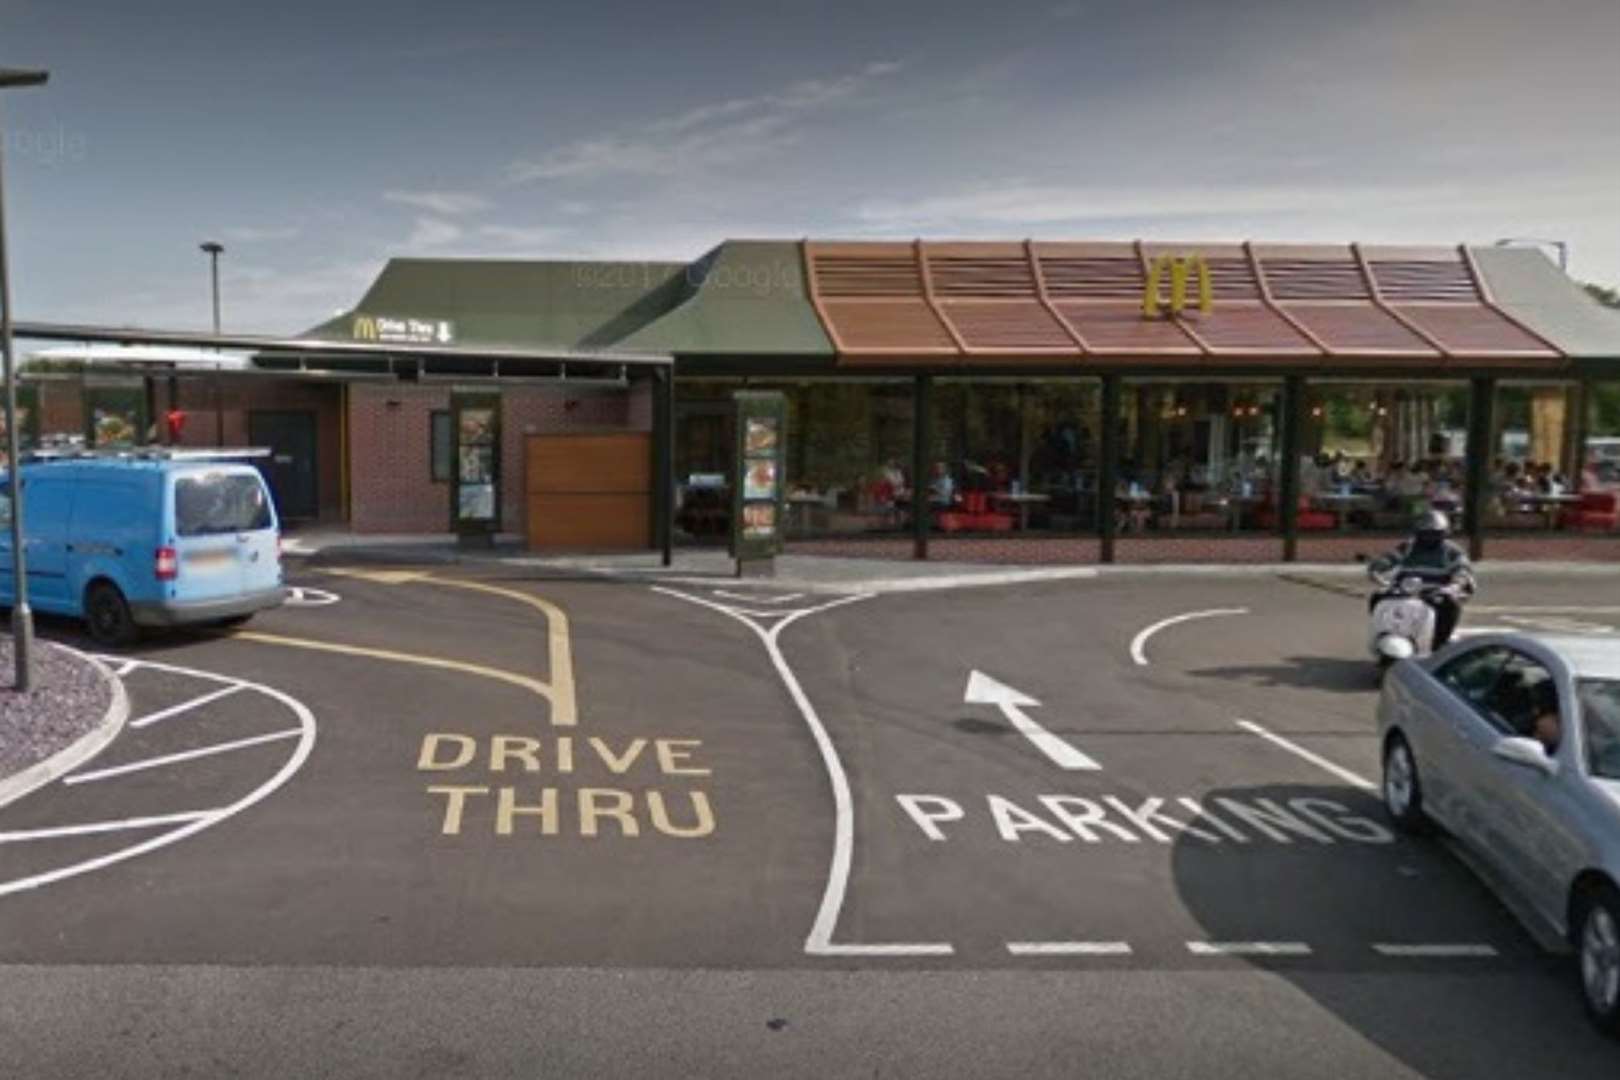 The McDonald's drive-thru at Chestfield is set for a redesign